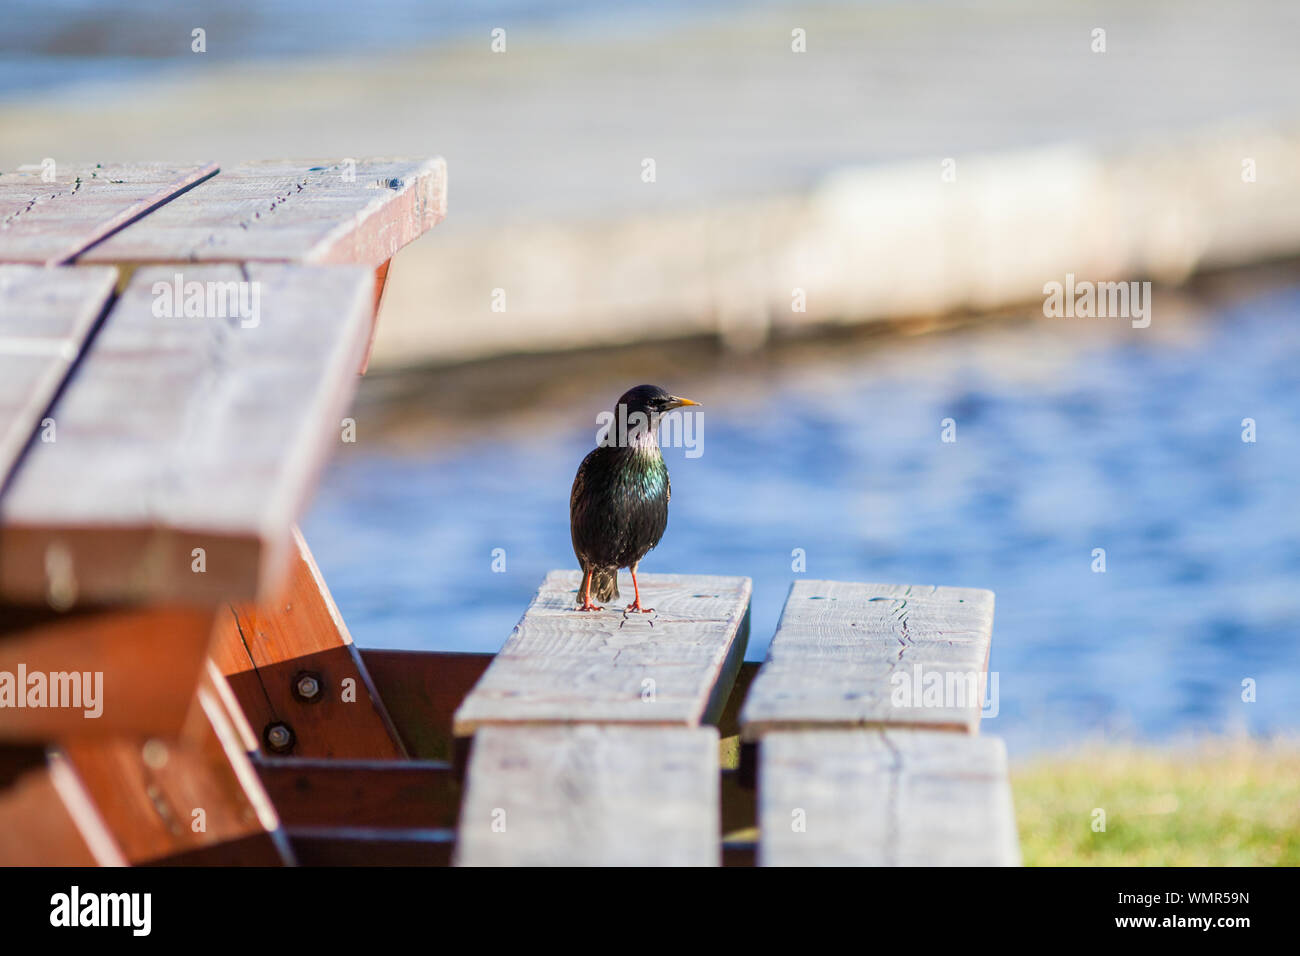 Perched Bird Against Blurred Water Stock Photo